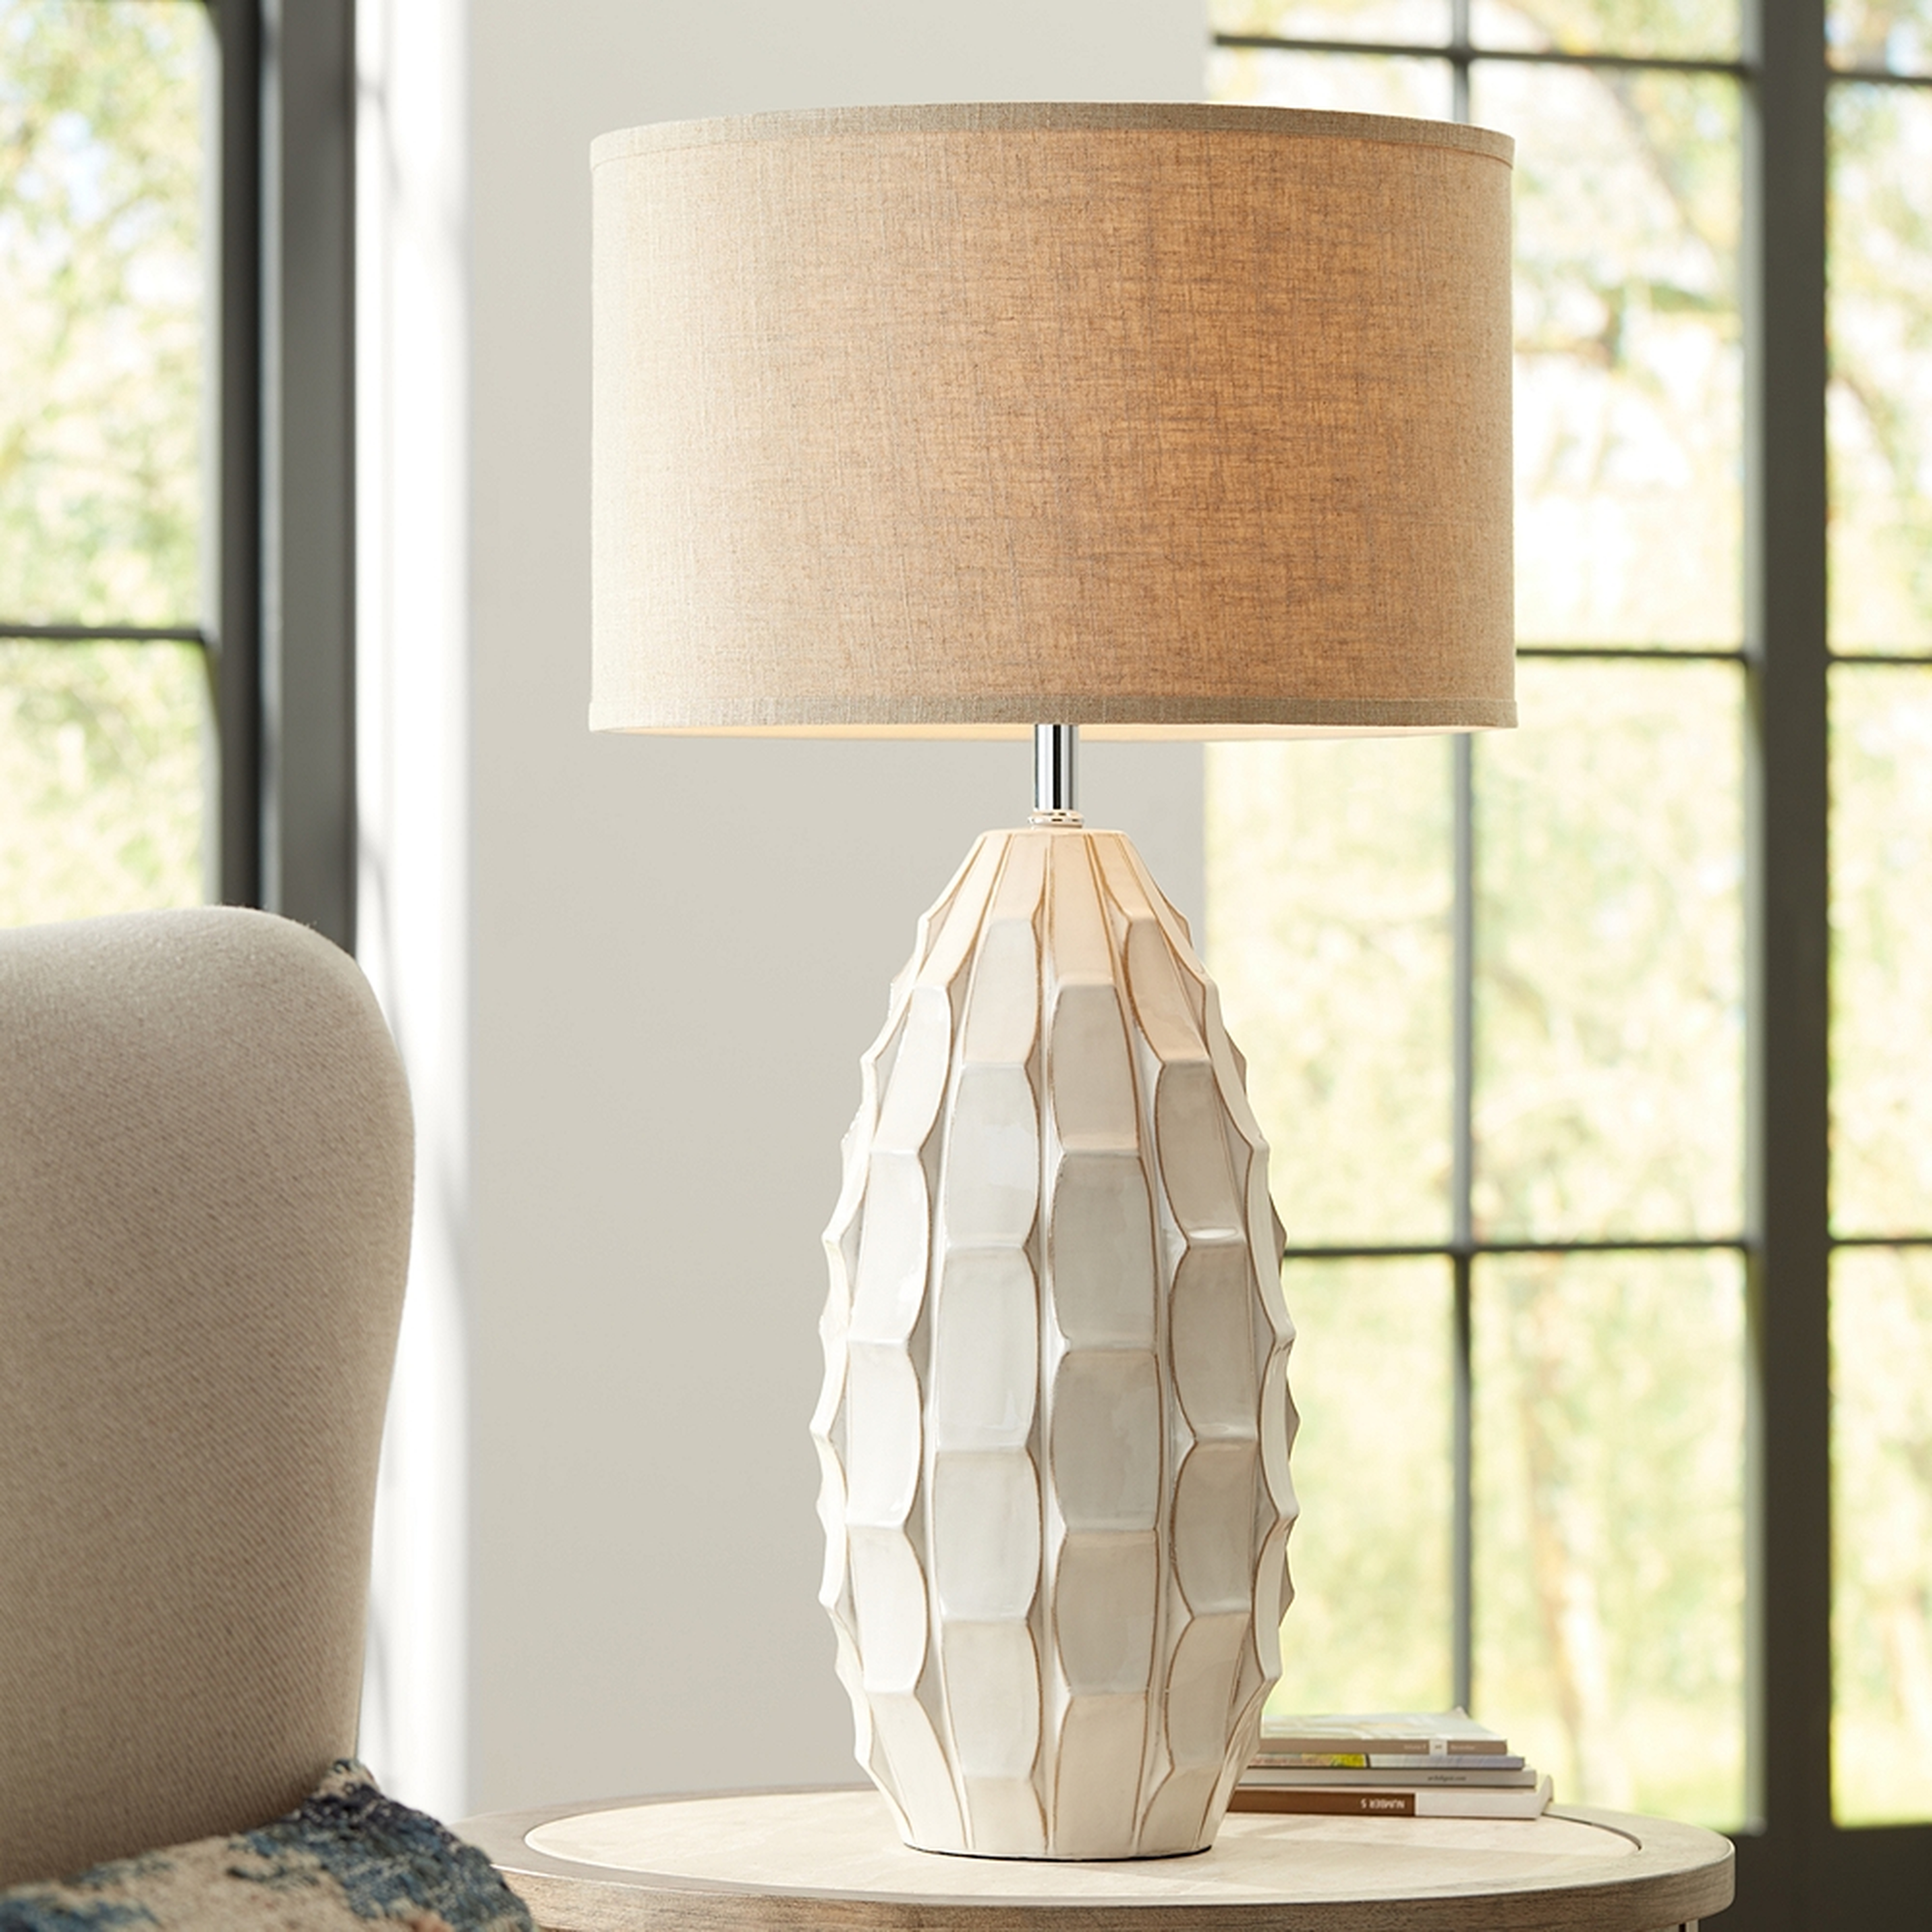 Cosgrove Oval White Ceramic Table Lamp with Table Top Dimmer - Style # 89K71 - Lamps Plus